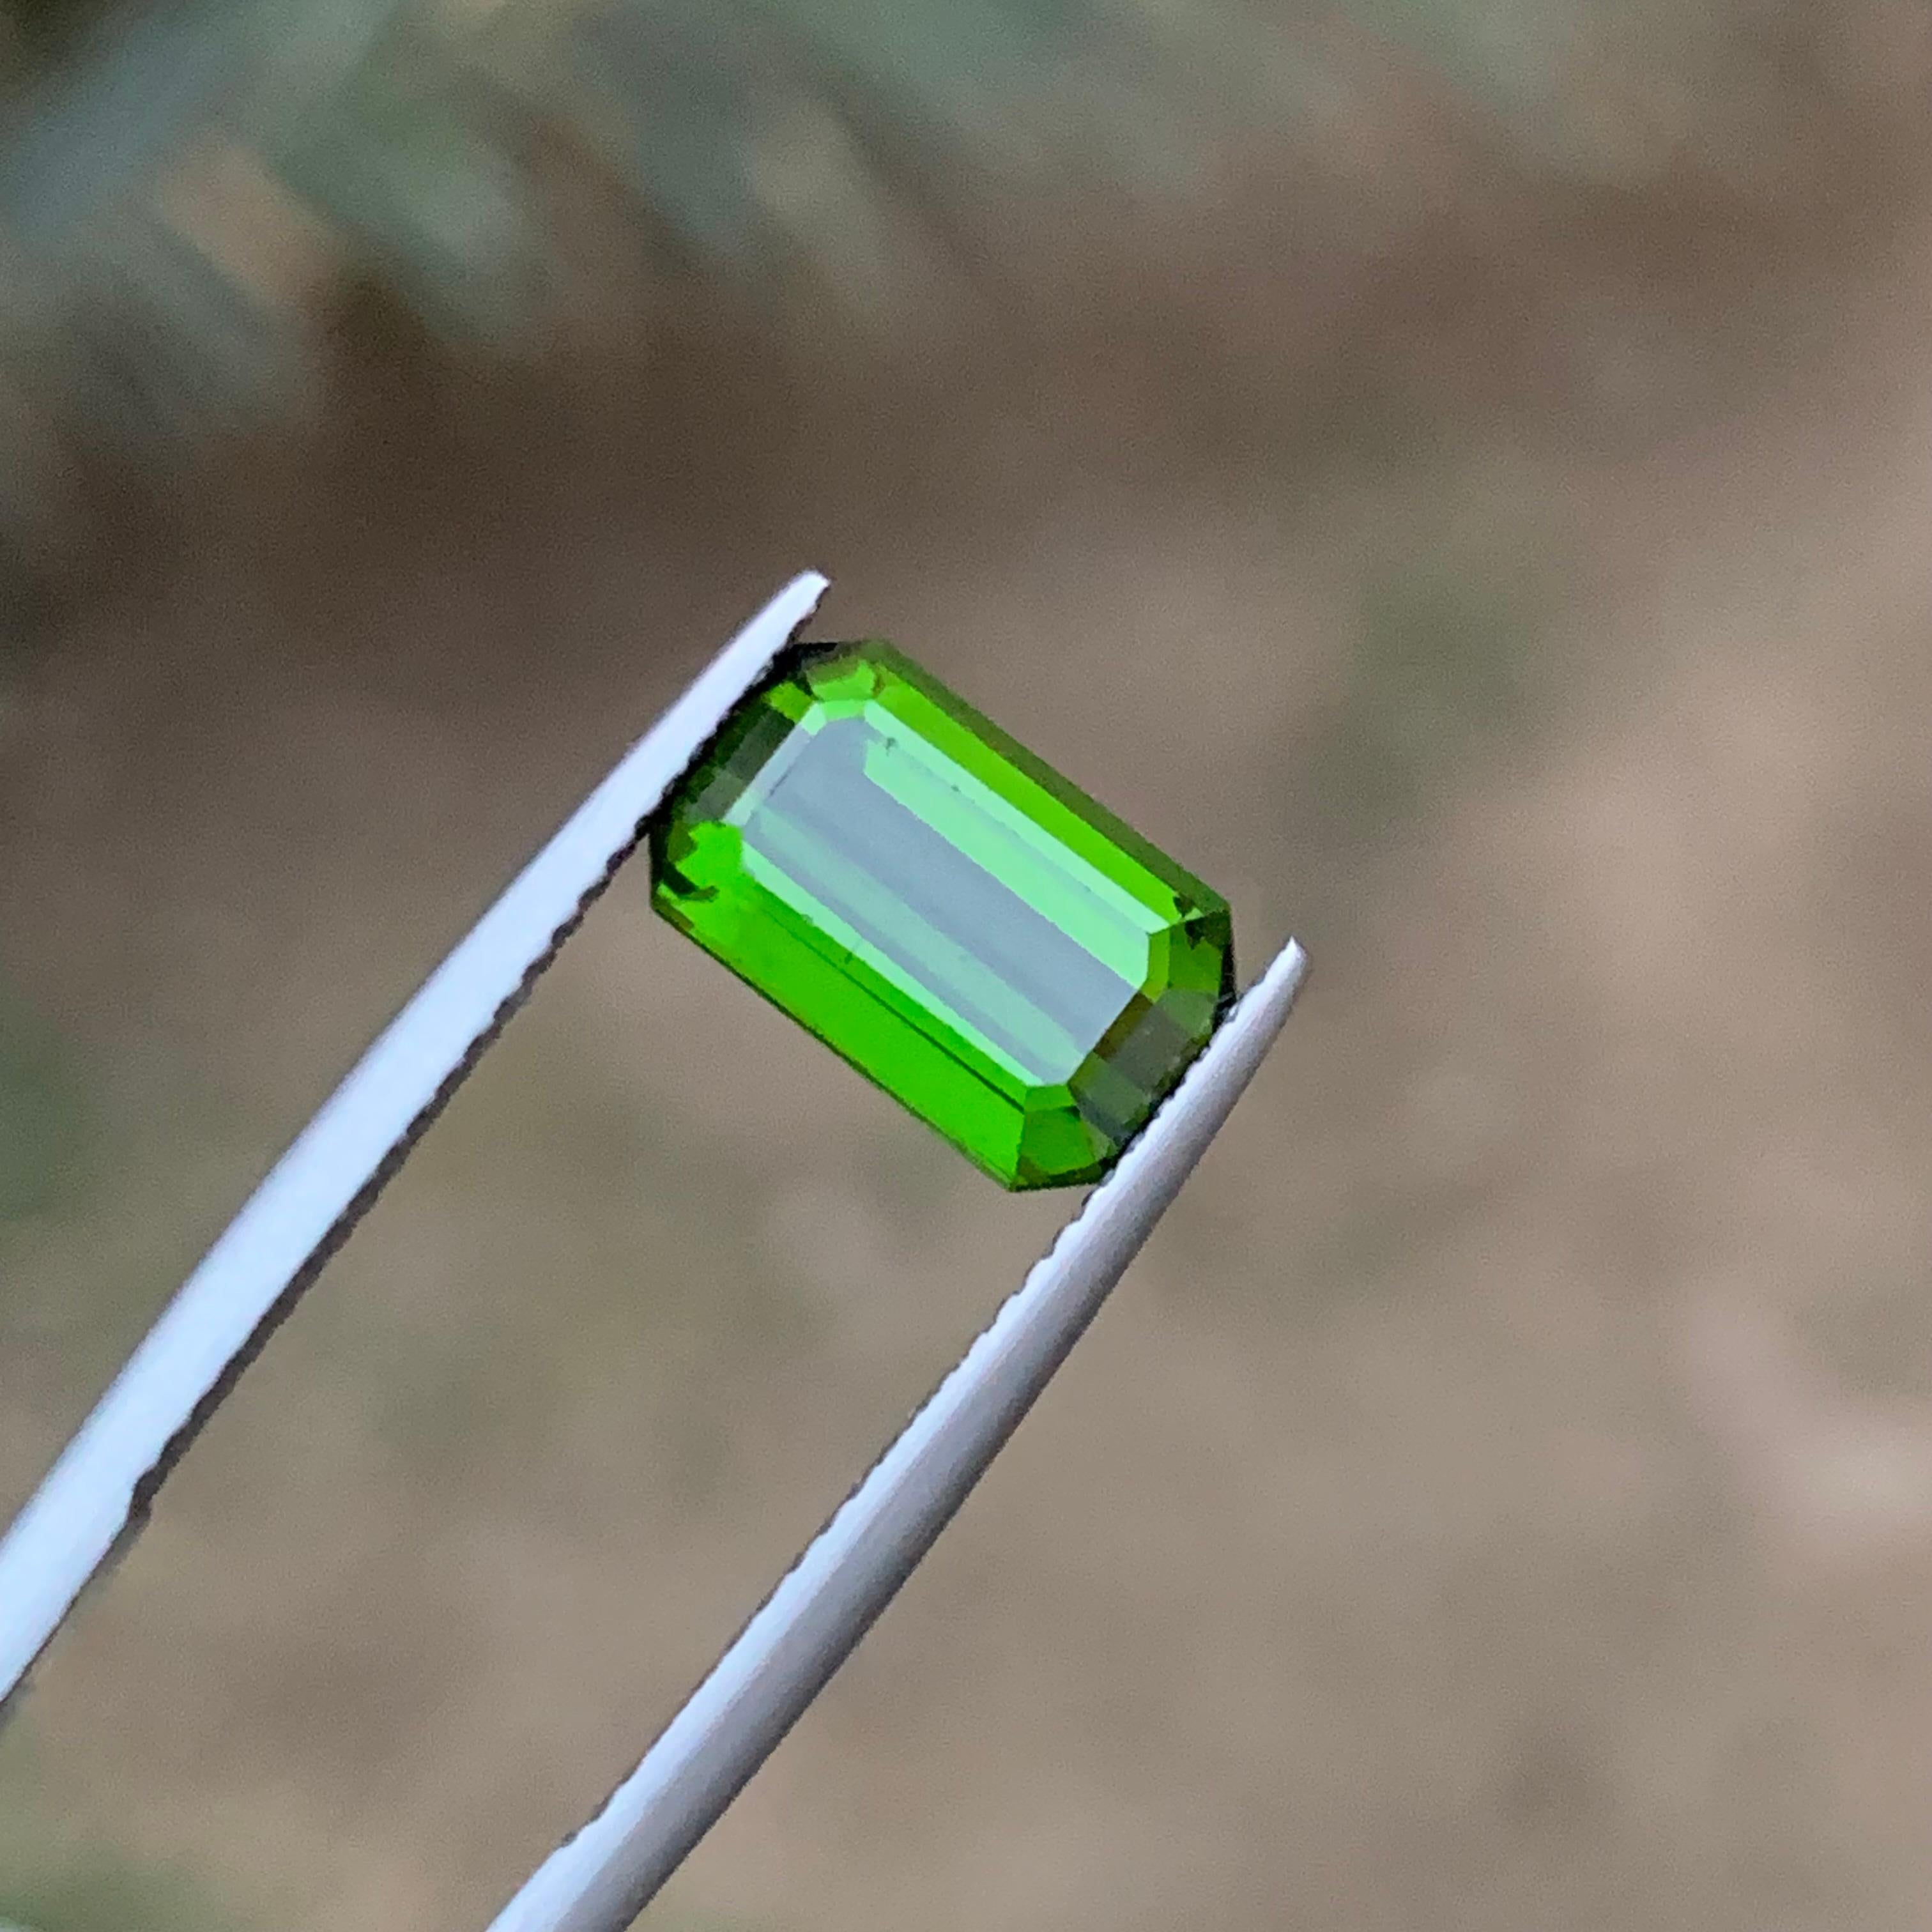 Contemporary Rare Vivid Green Tourmaline Gemstone, 3.35 Ct Emerald Cut for Ring/Necklace For Sale